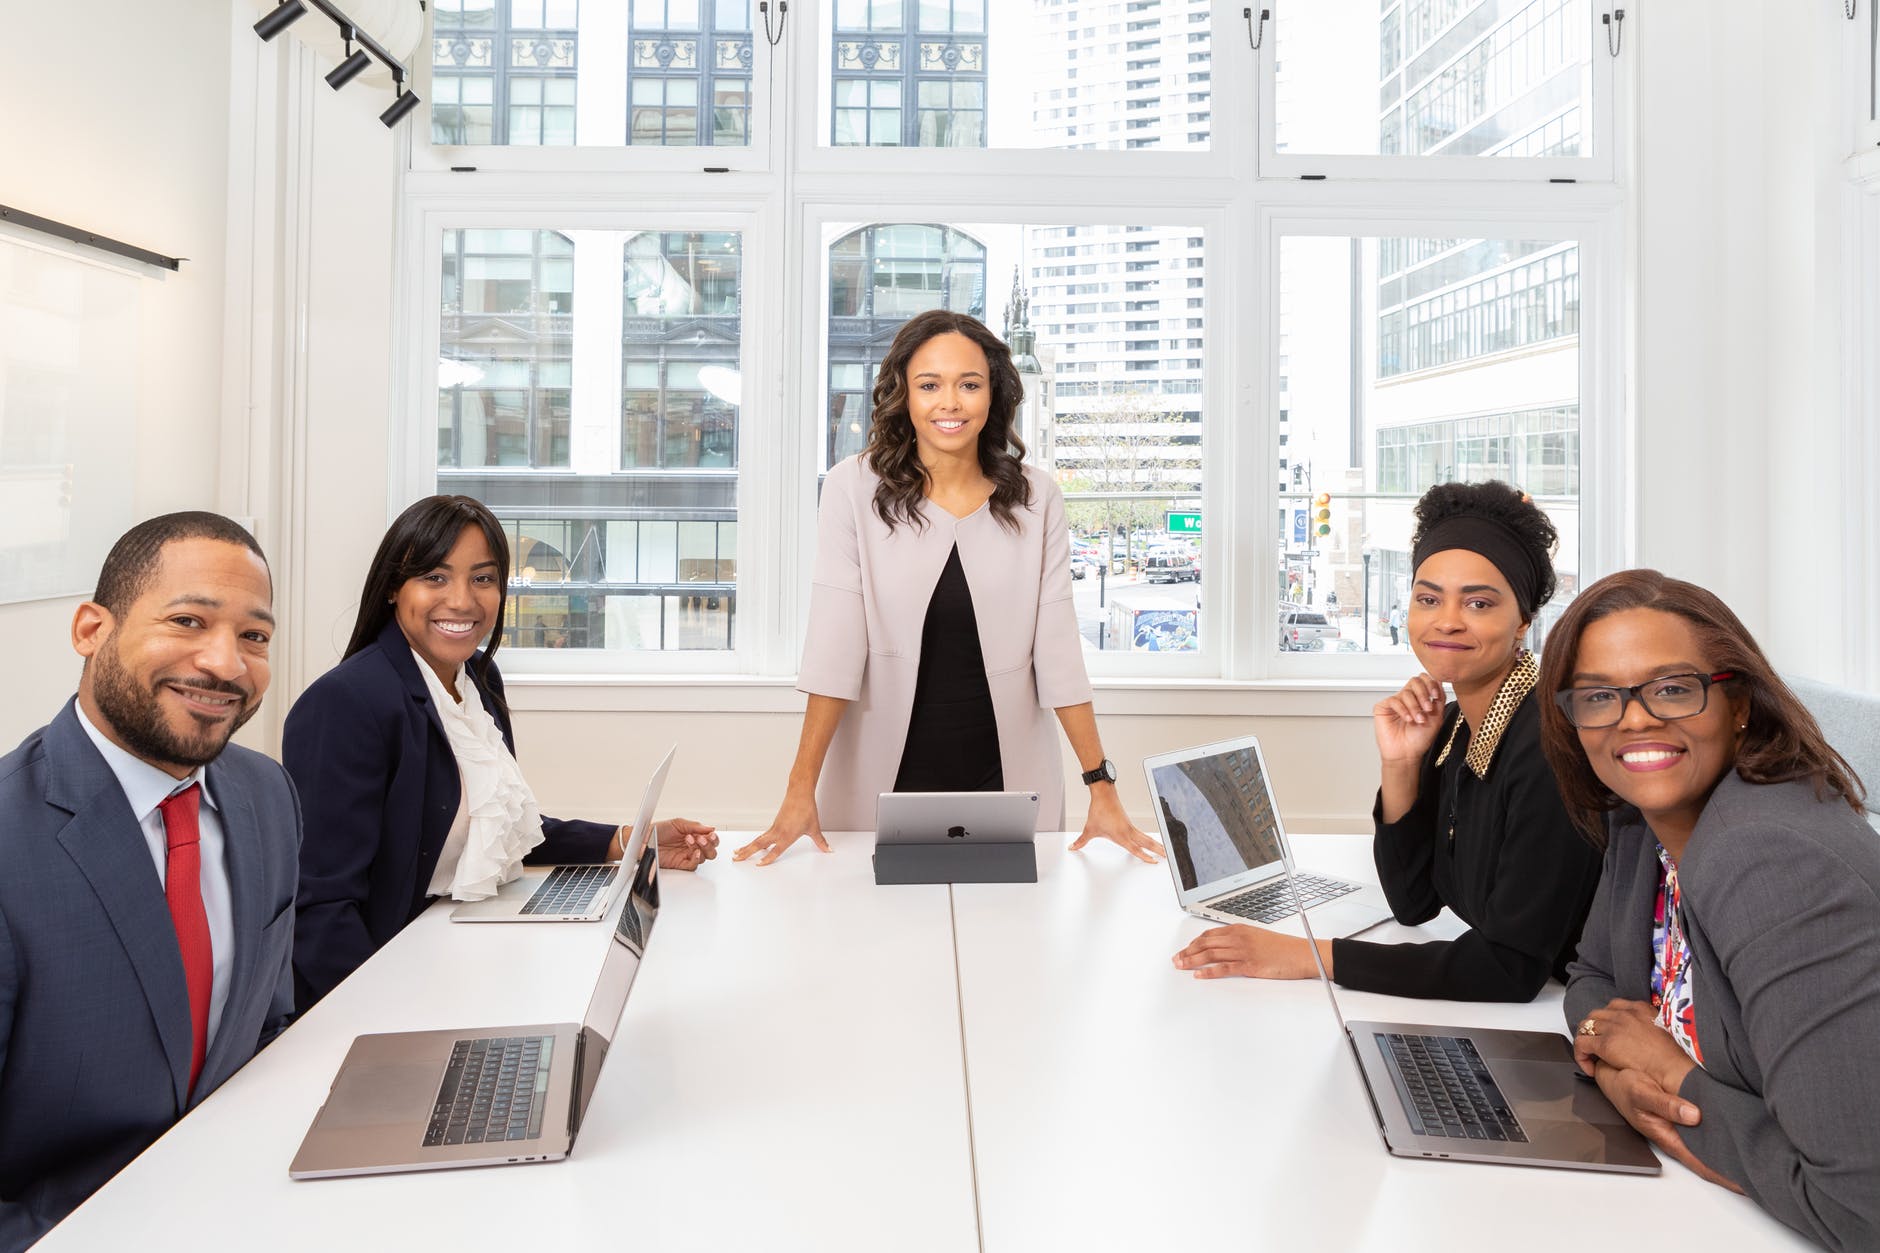 Leadership Tips for Women in the Workplace